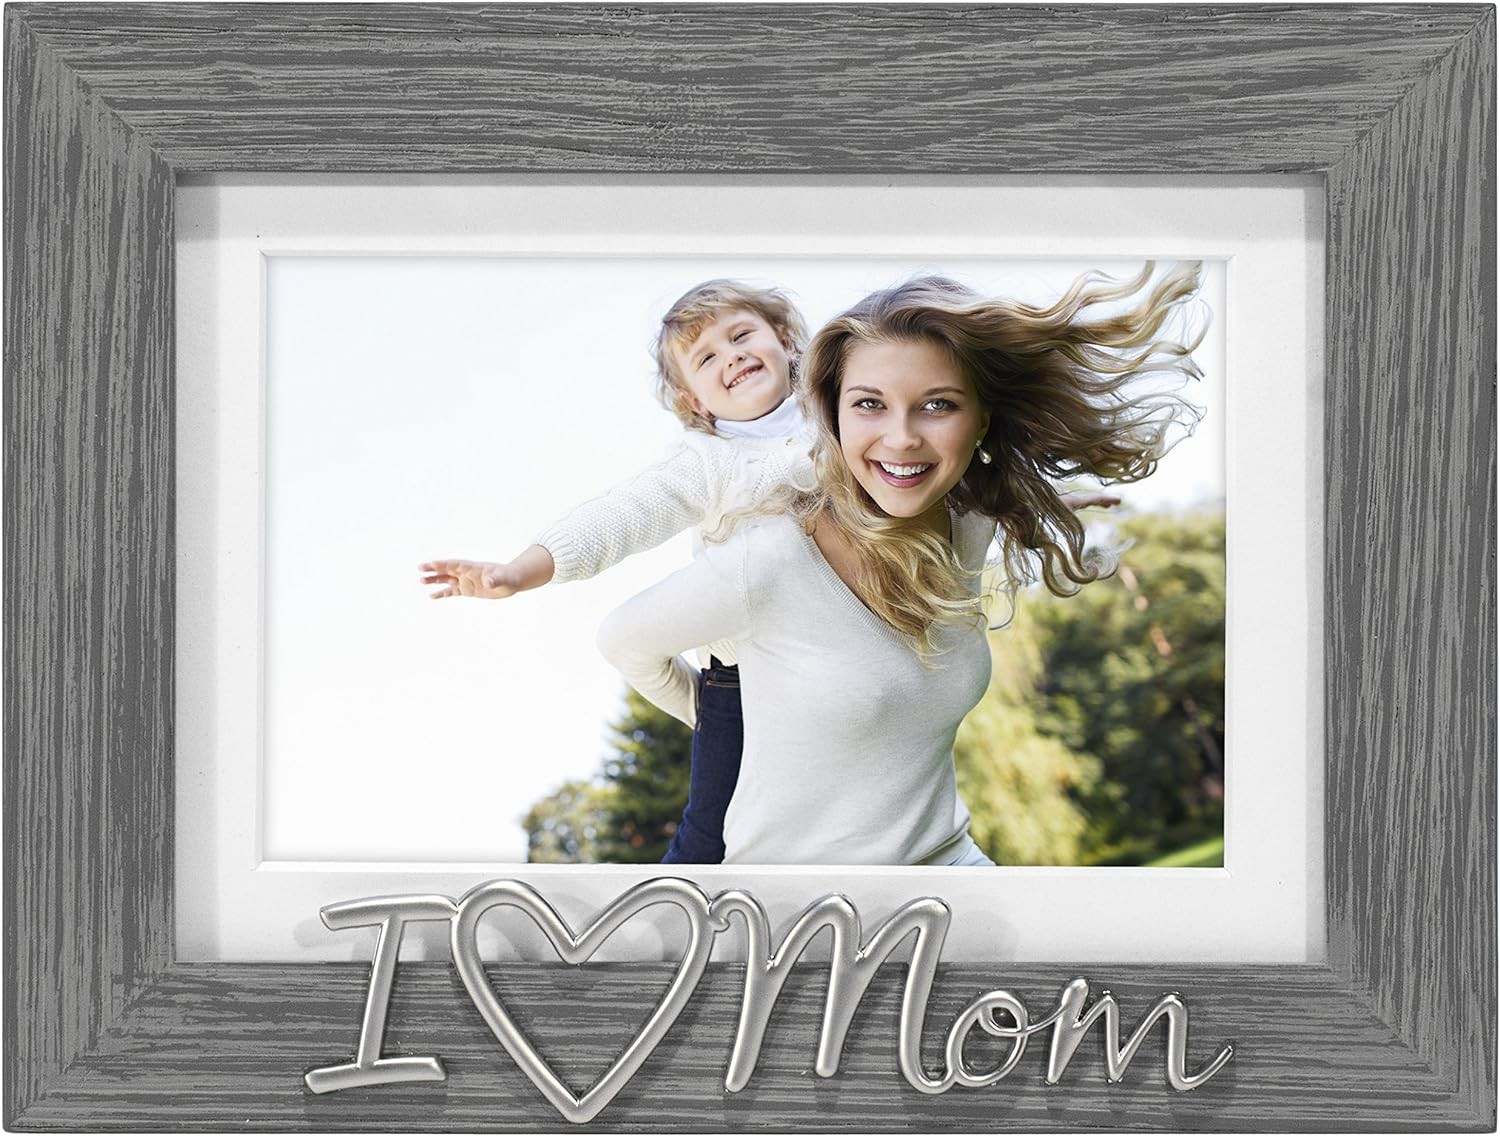 MALDEN 5X7/4x6 I LOVE MOM Distressed Expressions Gray Wood Frame / Silver Accent